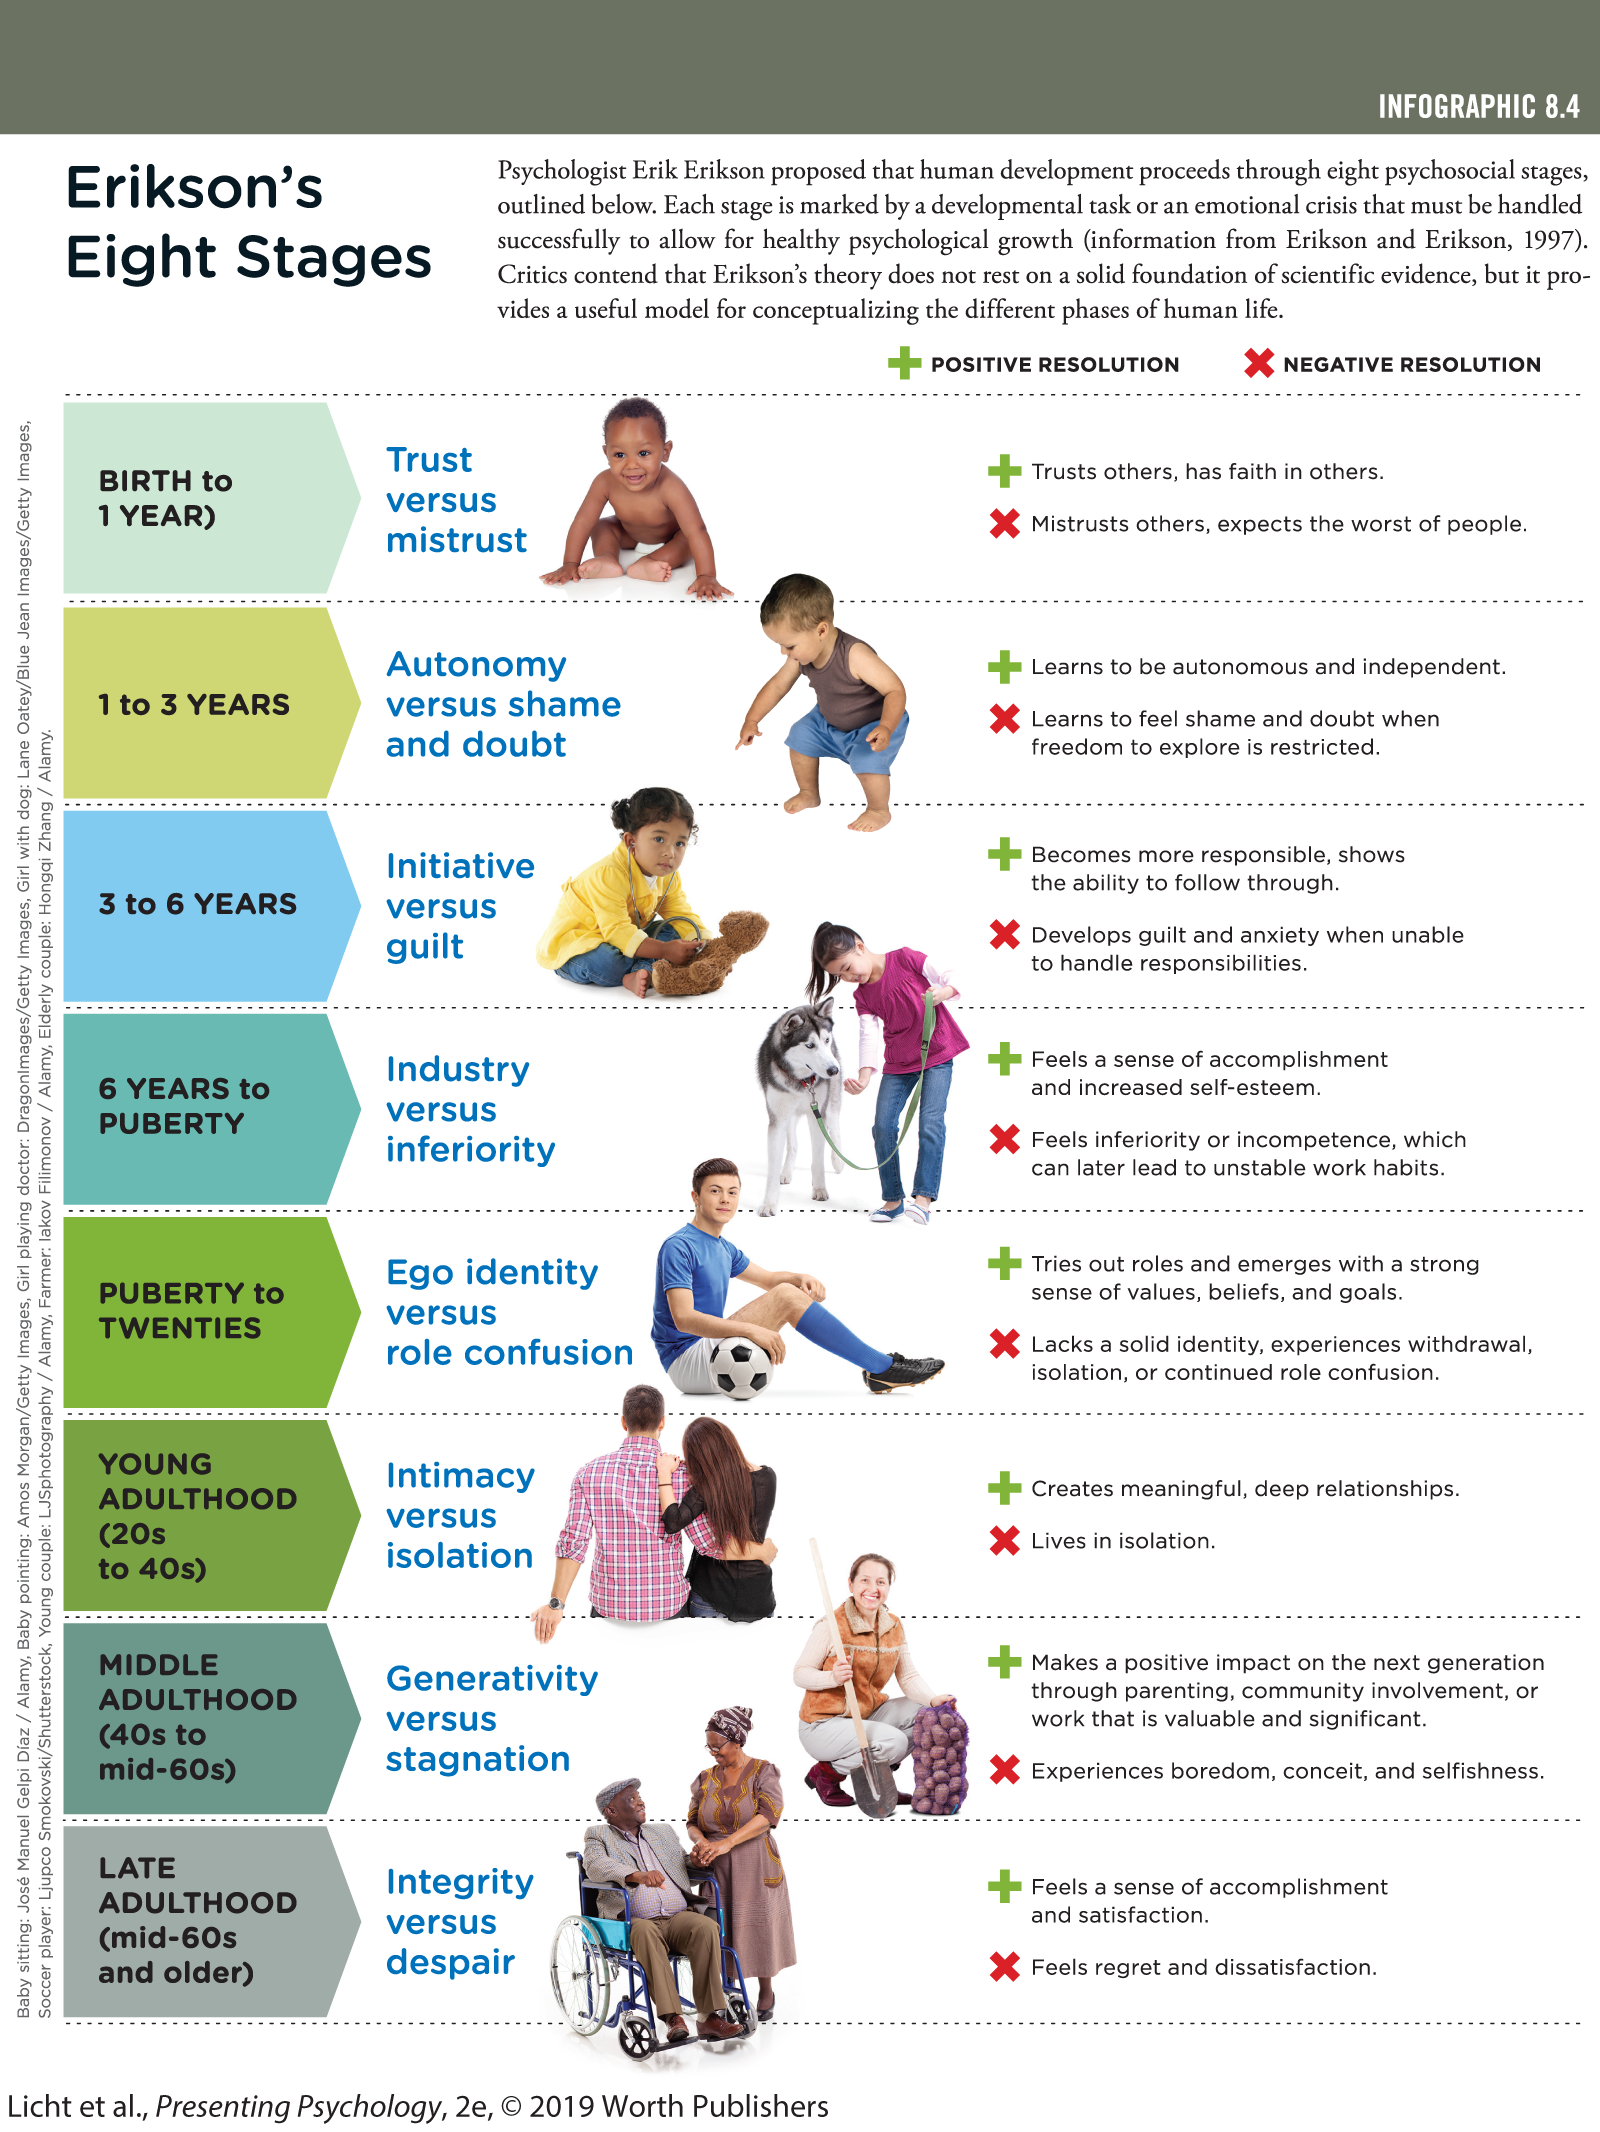  An infographic explains Erickson’s eight stages from birth to late adulthood including the traits and positive and negative resolution associated with it. The data are as follows:  You can read full description from the link below